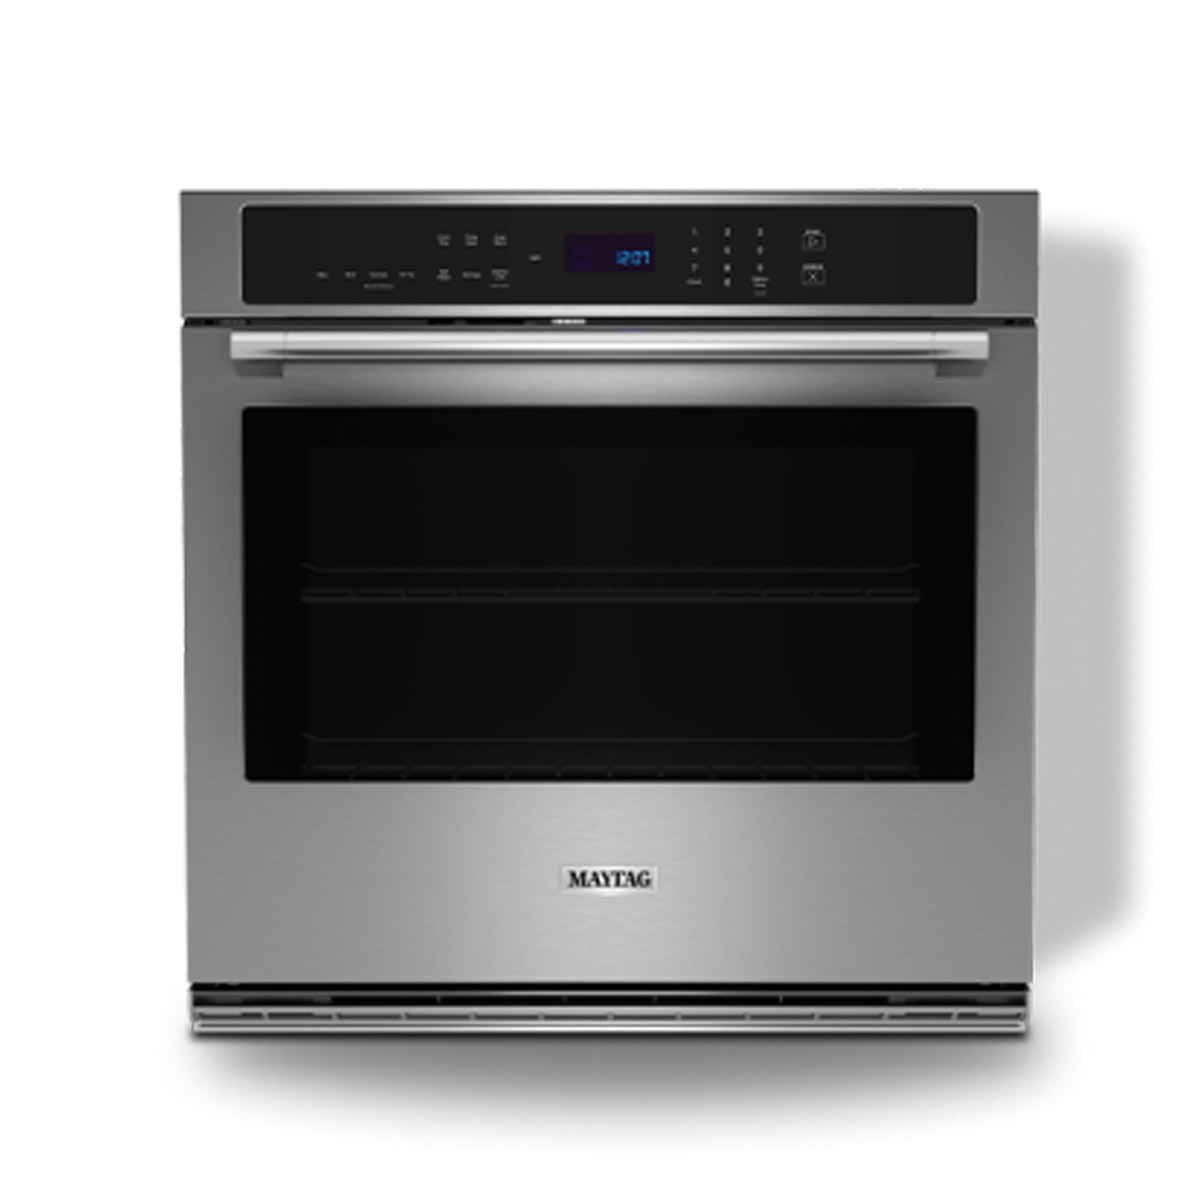 How To Fix The Error Code F4-E3 For Maytag Oven